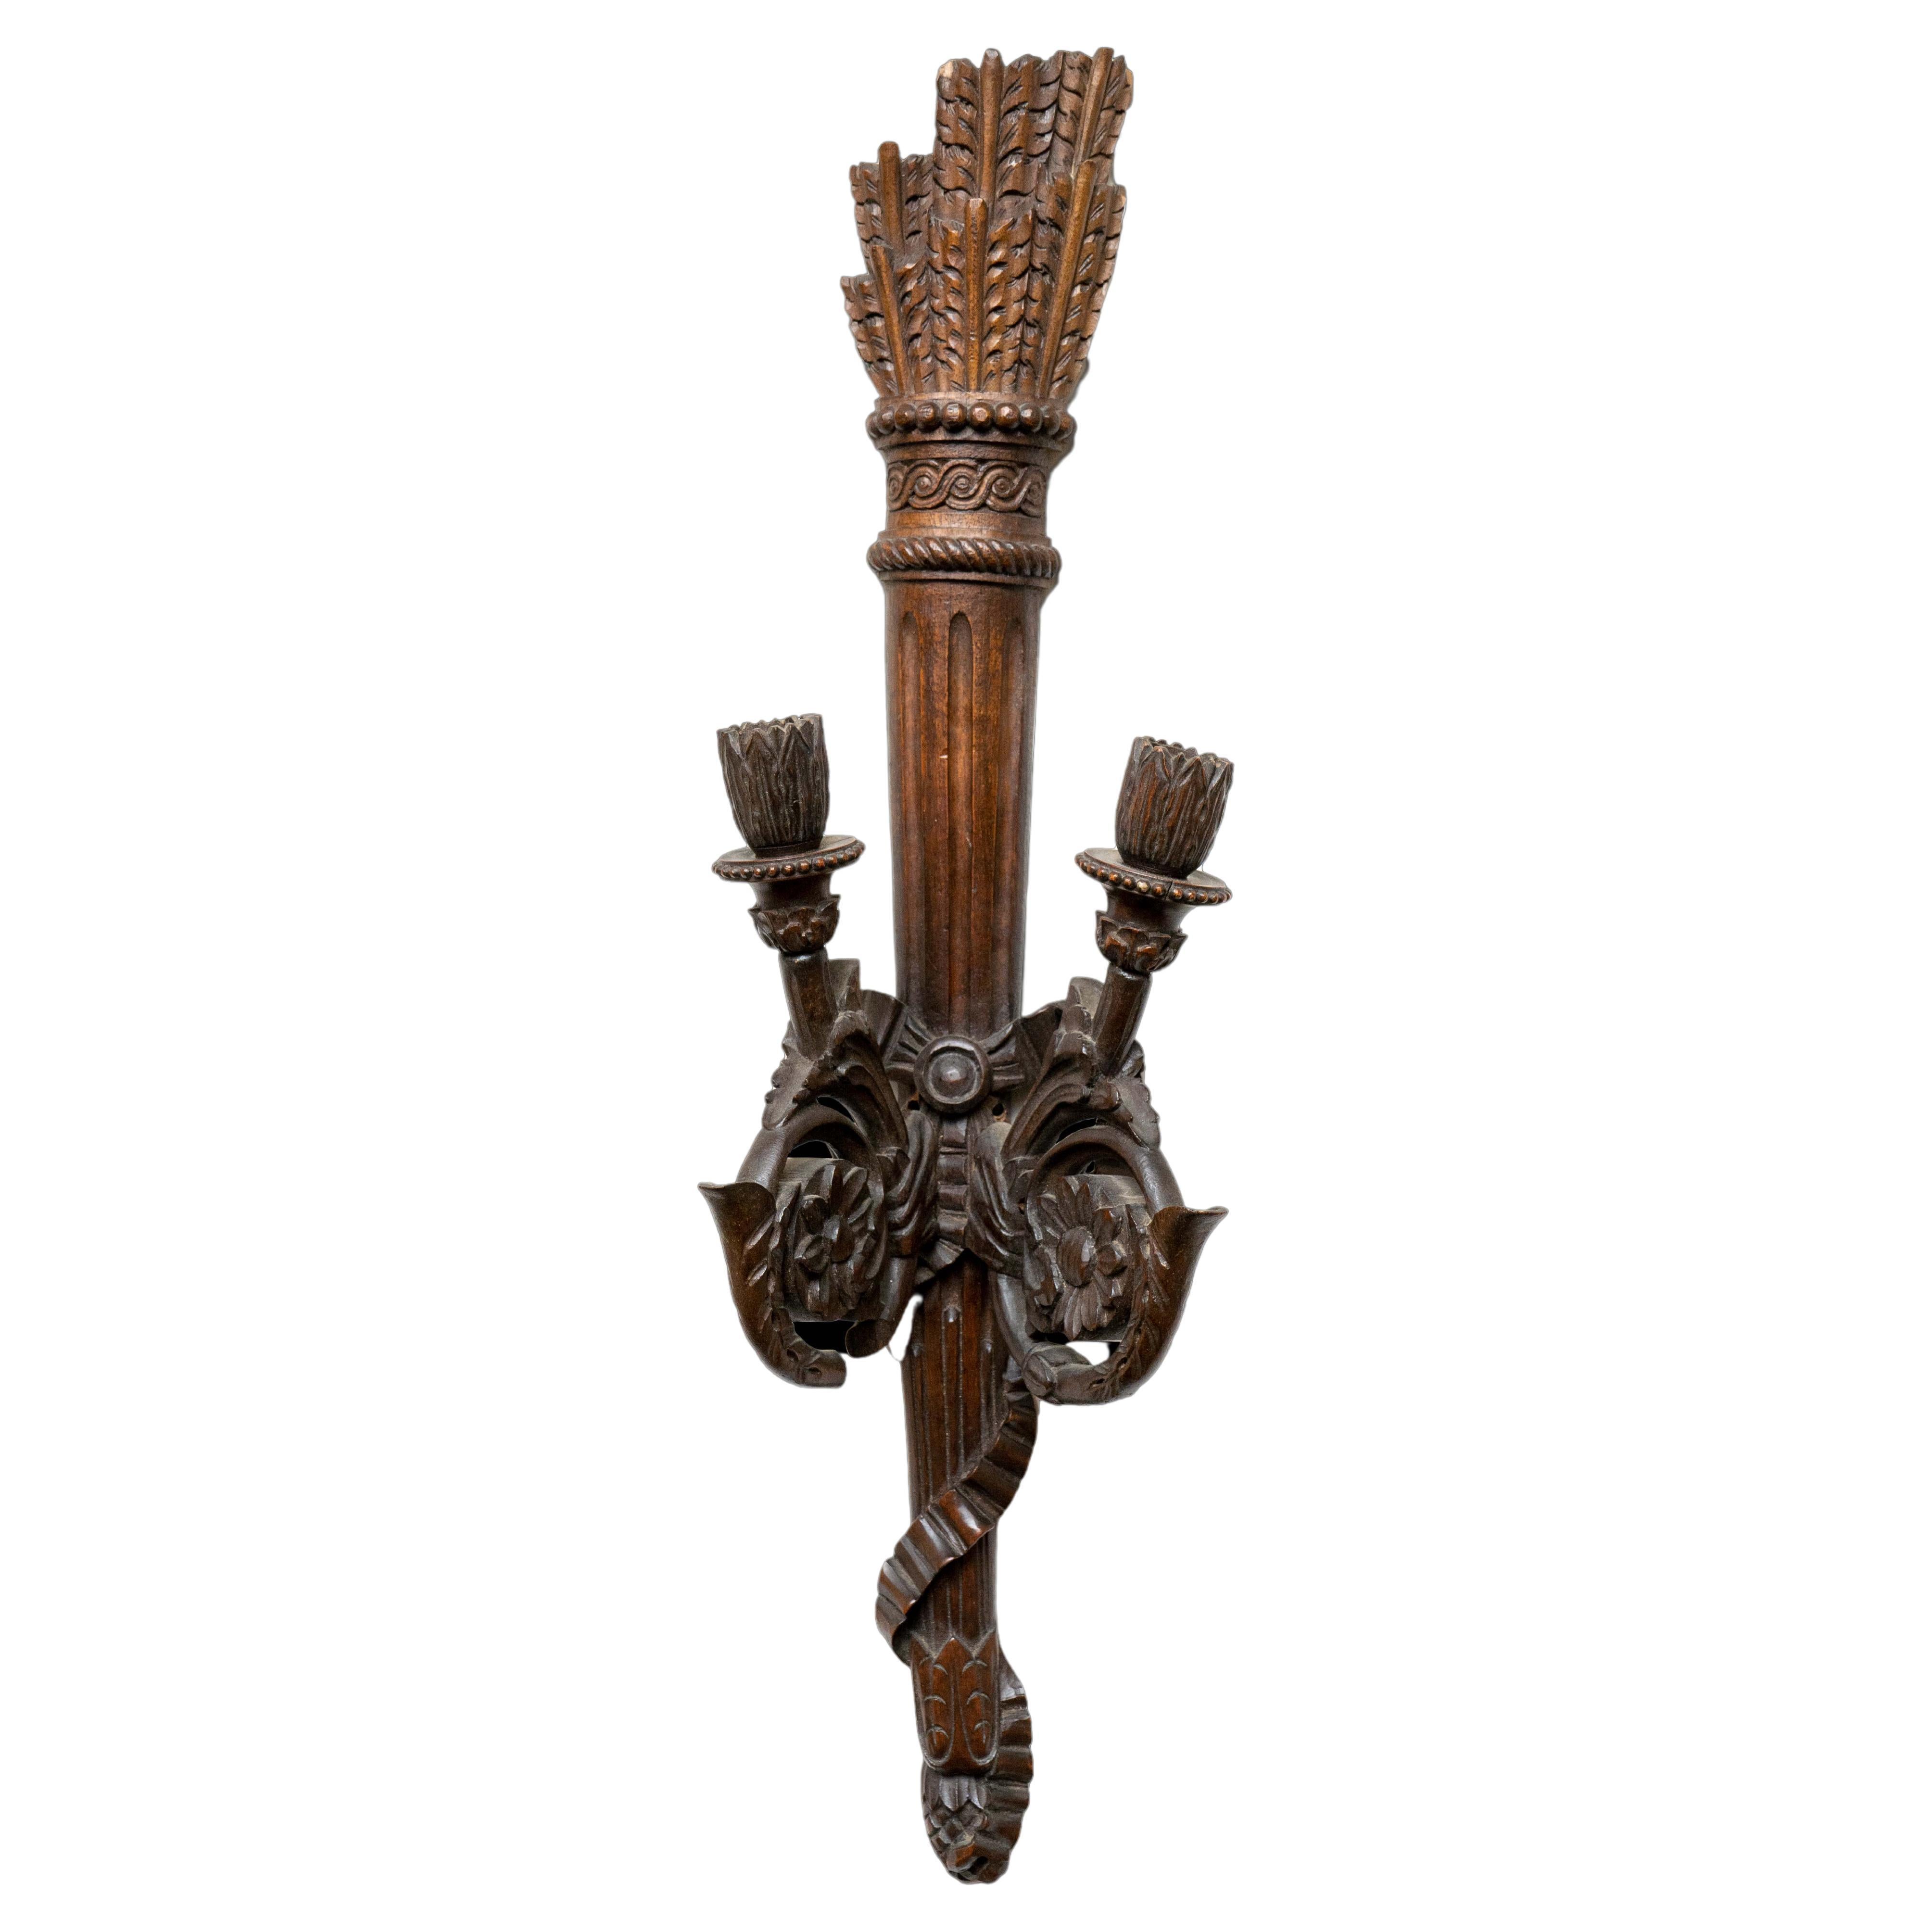 19th century pair of two arm carved wood quiver sconces with carved arrows. Can be electrified or used with candles.

Measures: 6